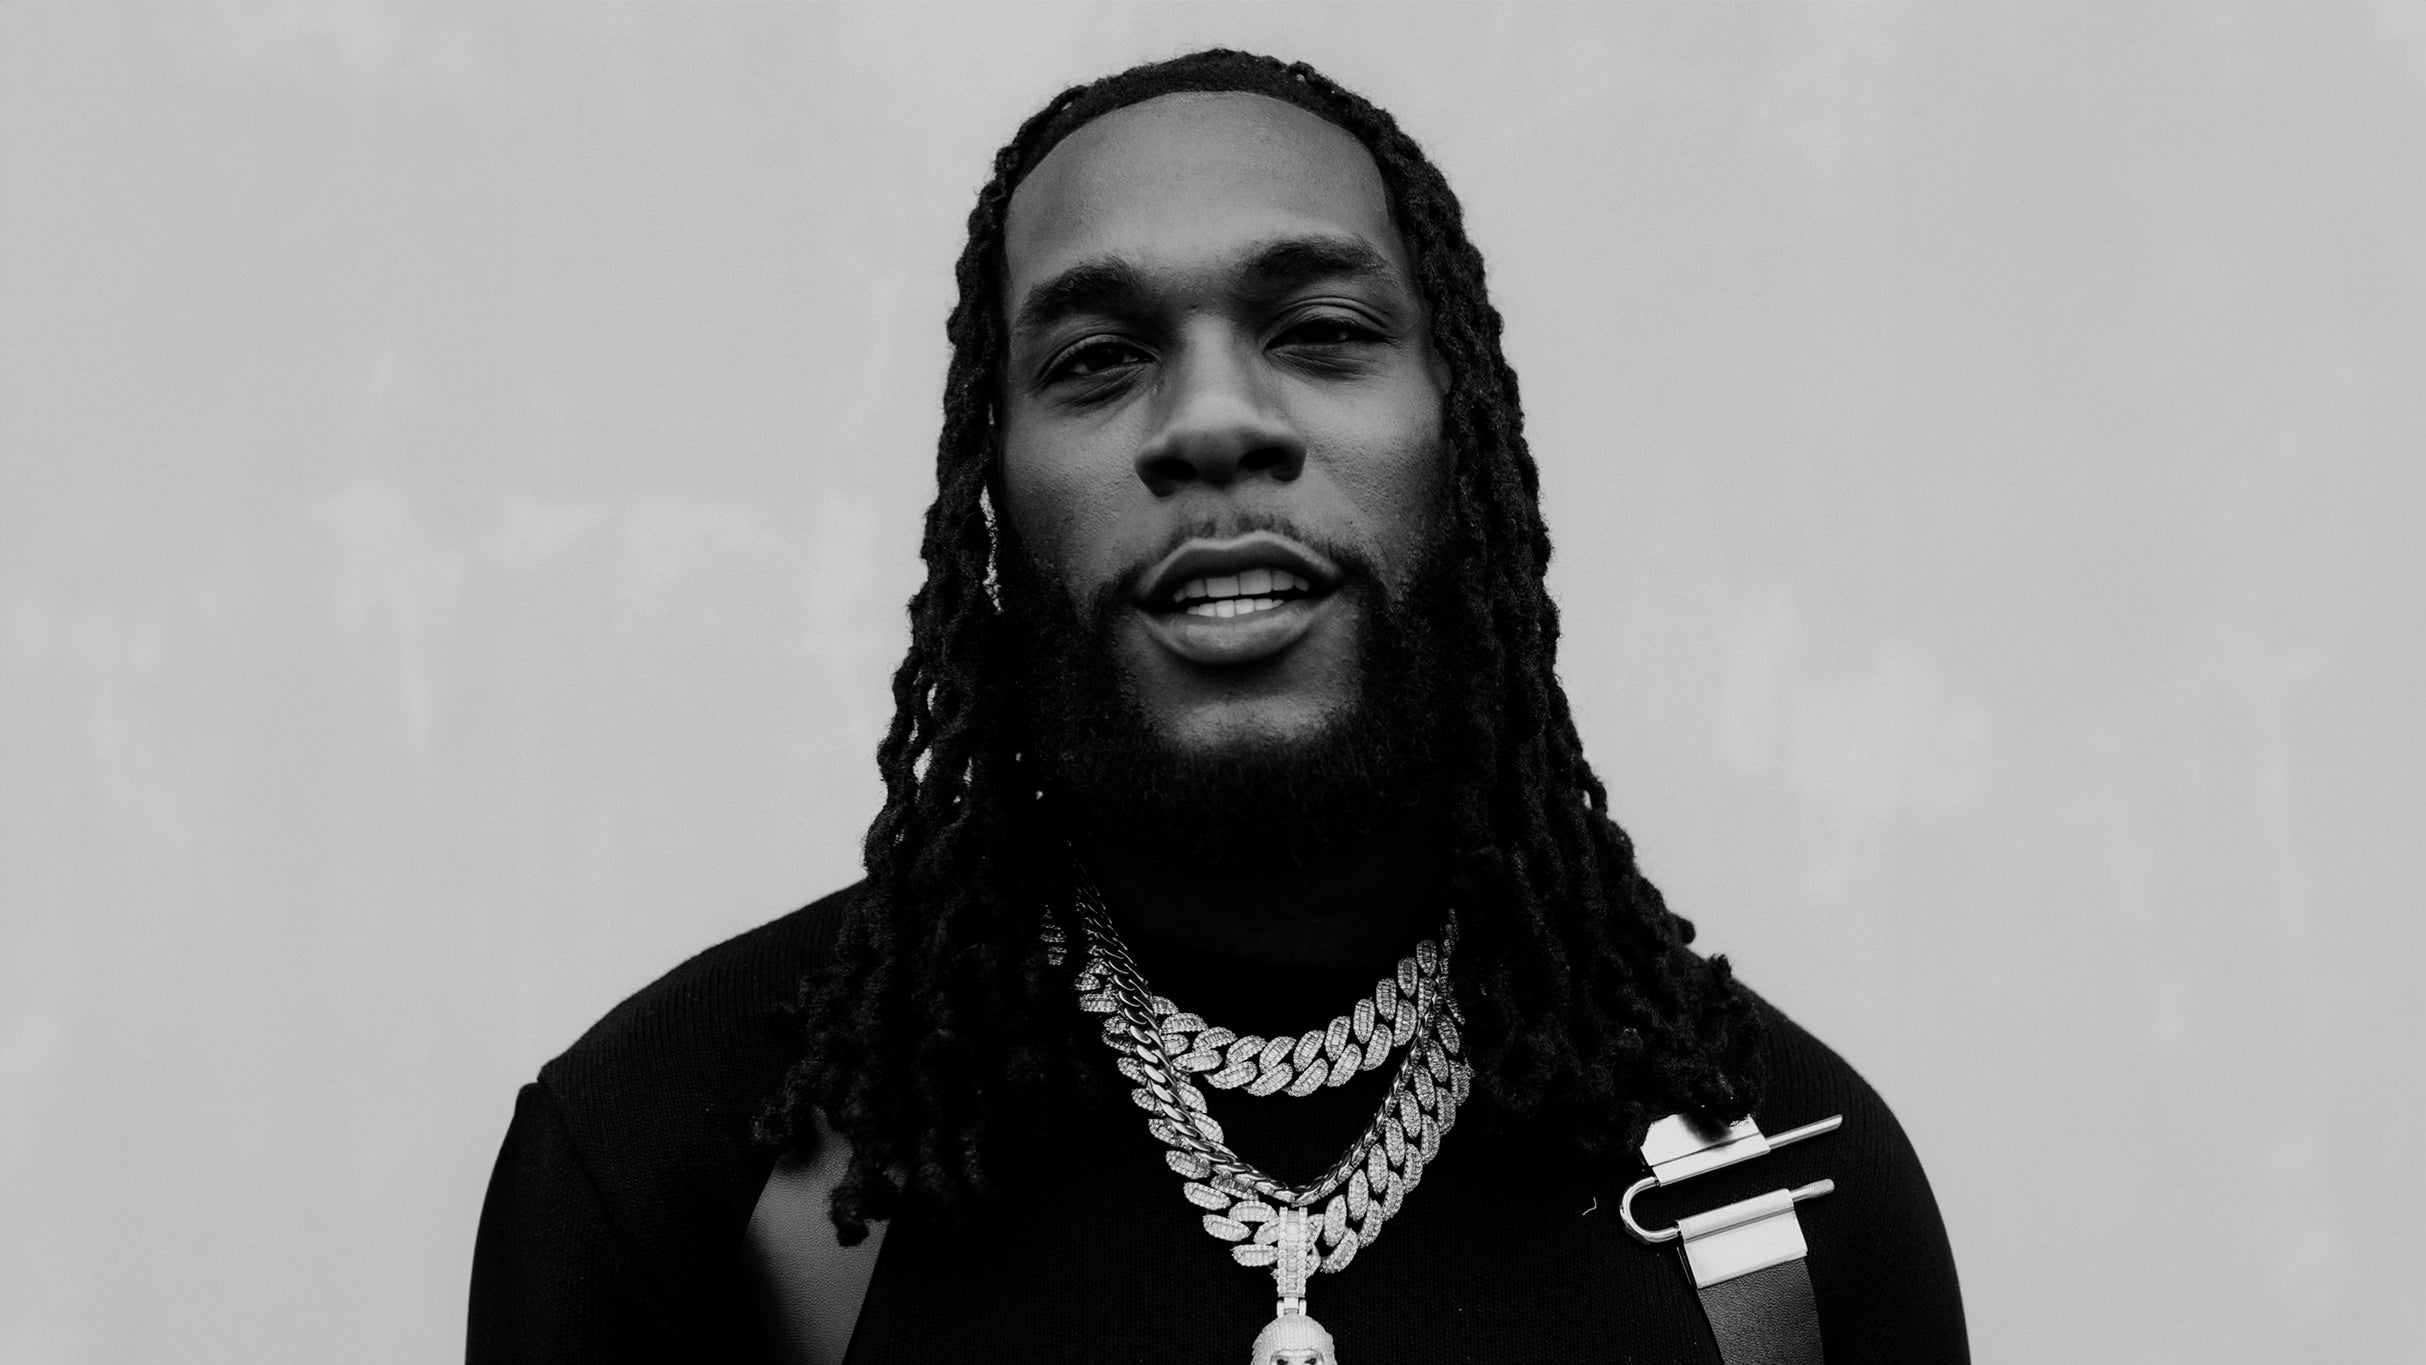 Burna Boy: I Told Them Tour free presale passcode for early tickets in Montreal